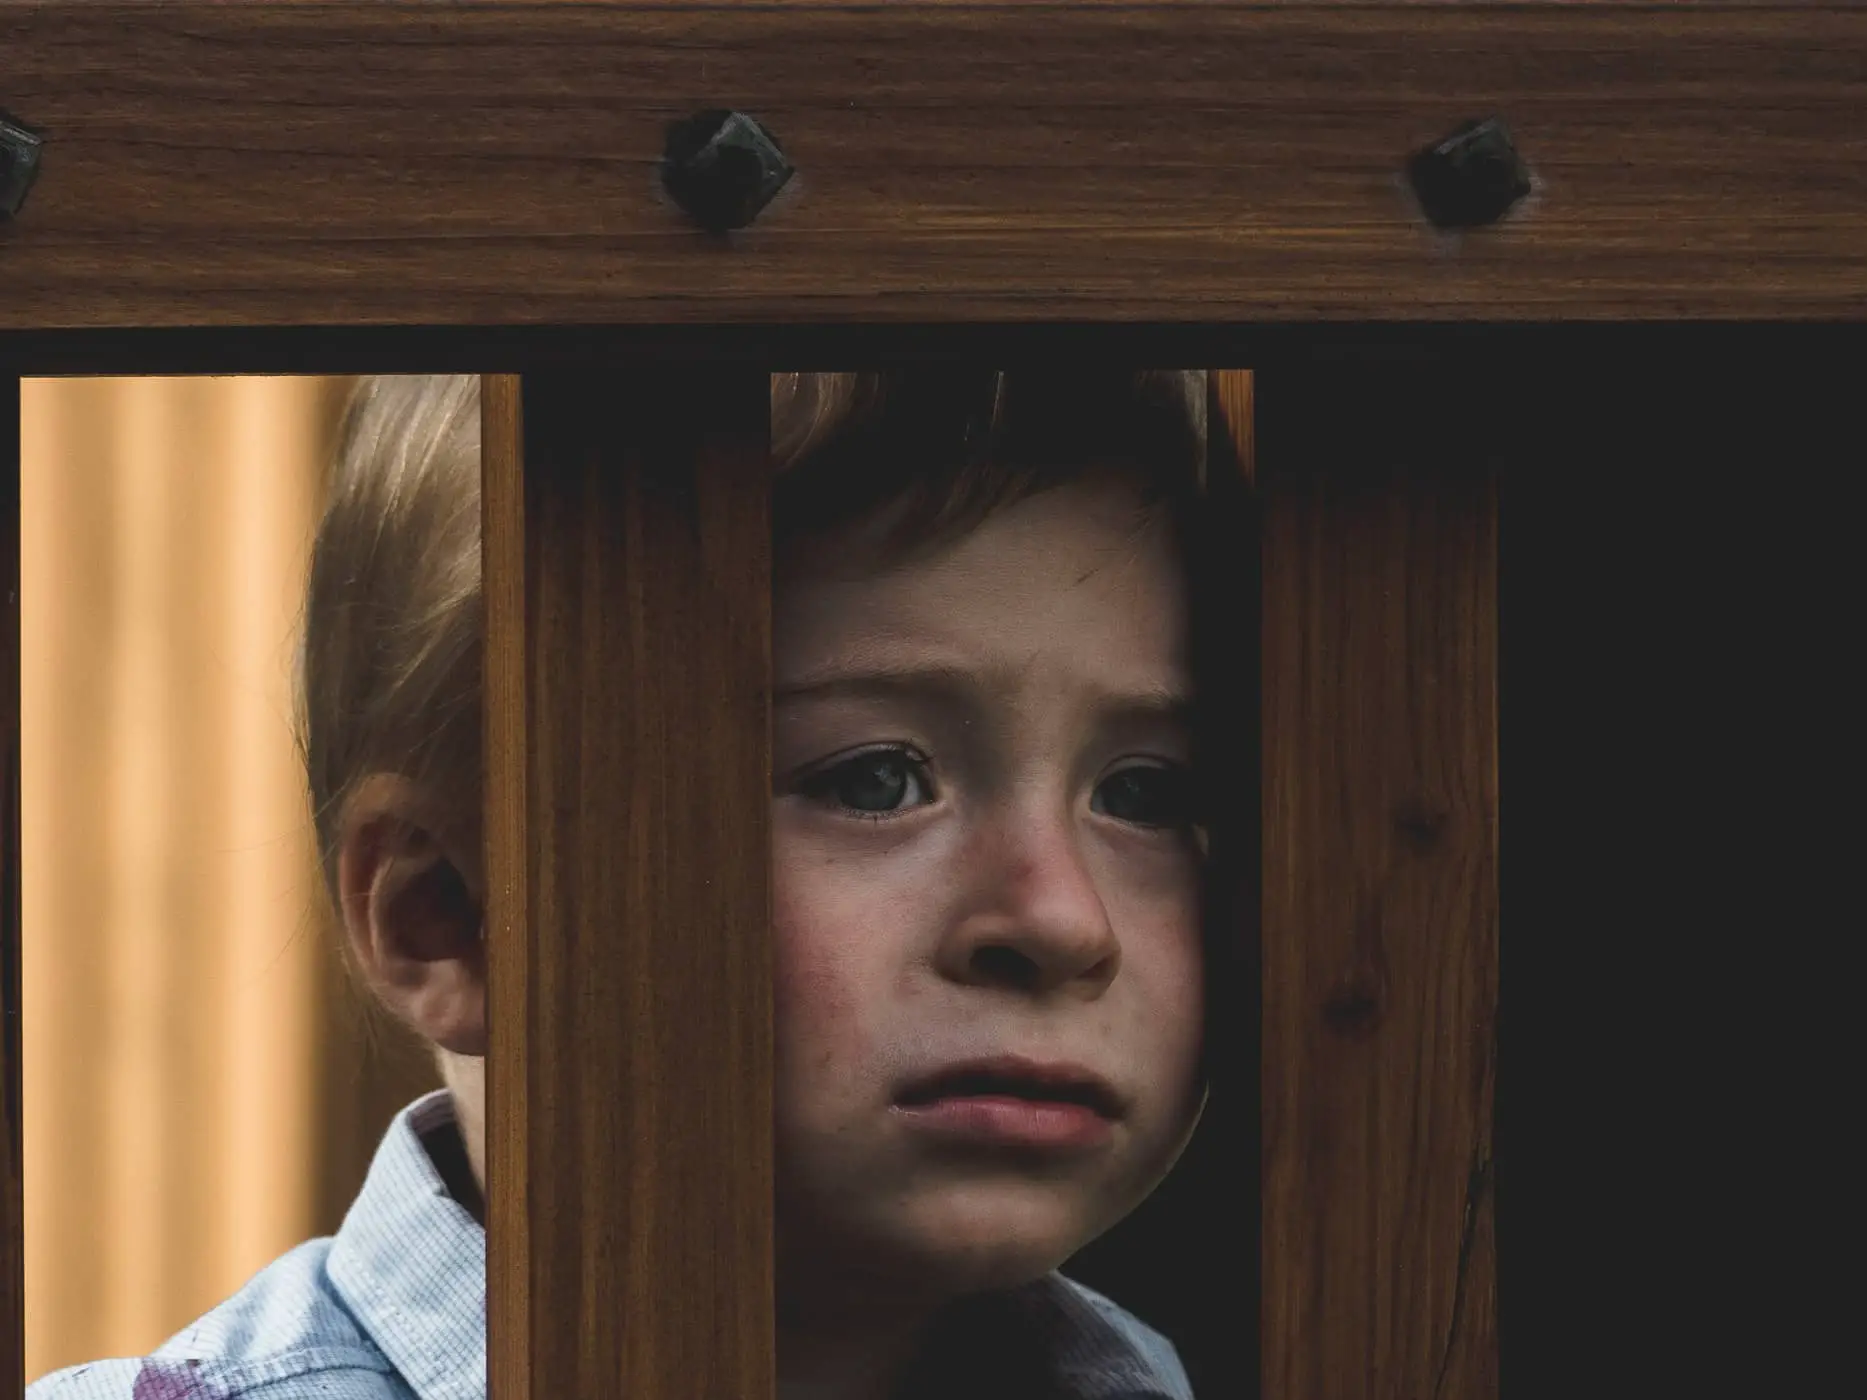 unhappy child leaning on wooden fence